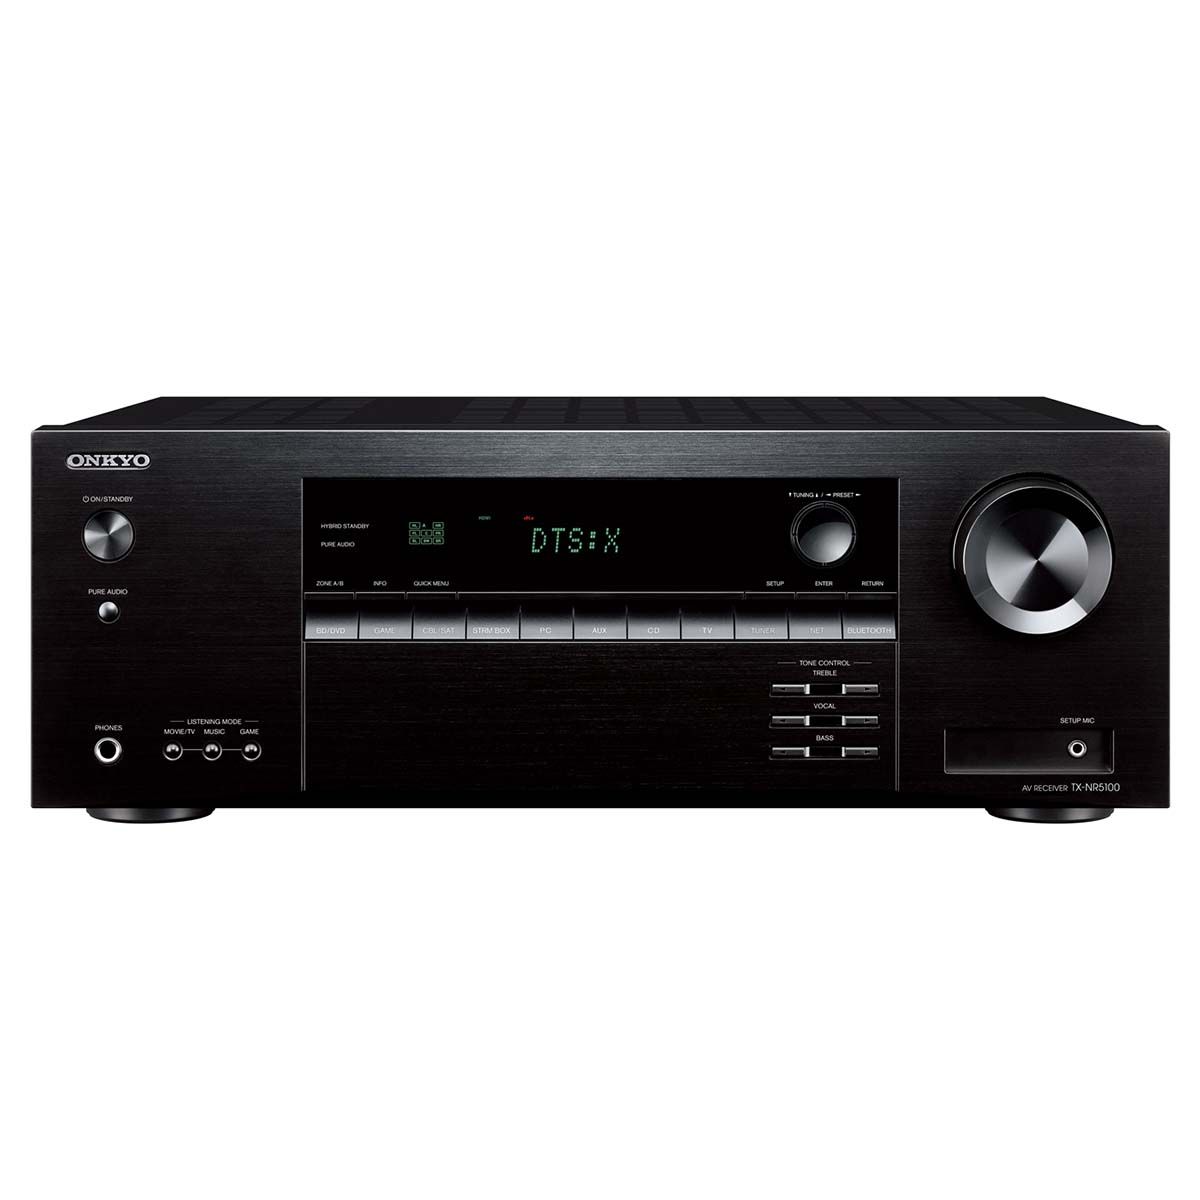 Onkyo TX-NR5100 Home Theater Receiver, front view